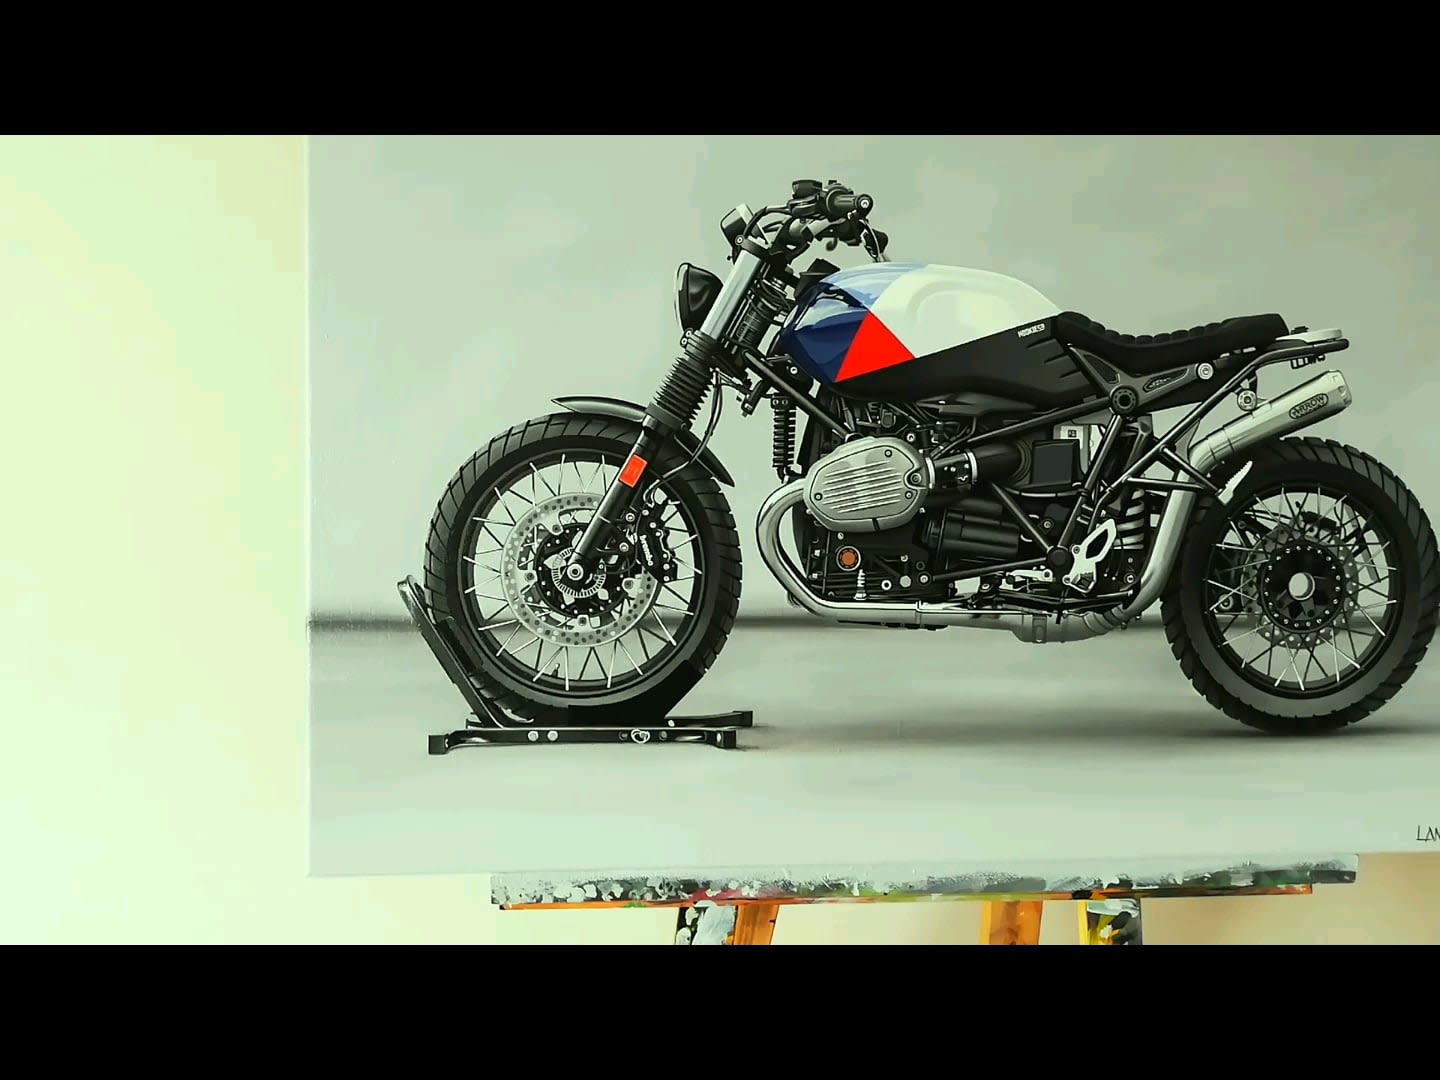 Check out my latest Motorcycle painting. The 2018 BMW R NineT Scrambler. This piece is 100% Hand painted with Acrylic Paint on 84..4 Canvas. Hope you guys love it. Cheers 🙂.